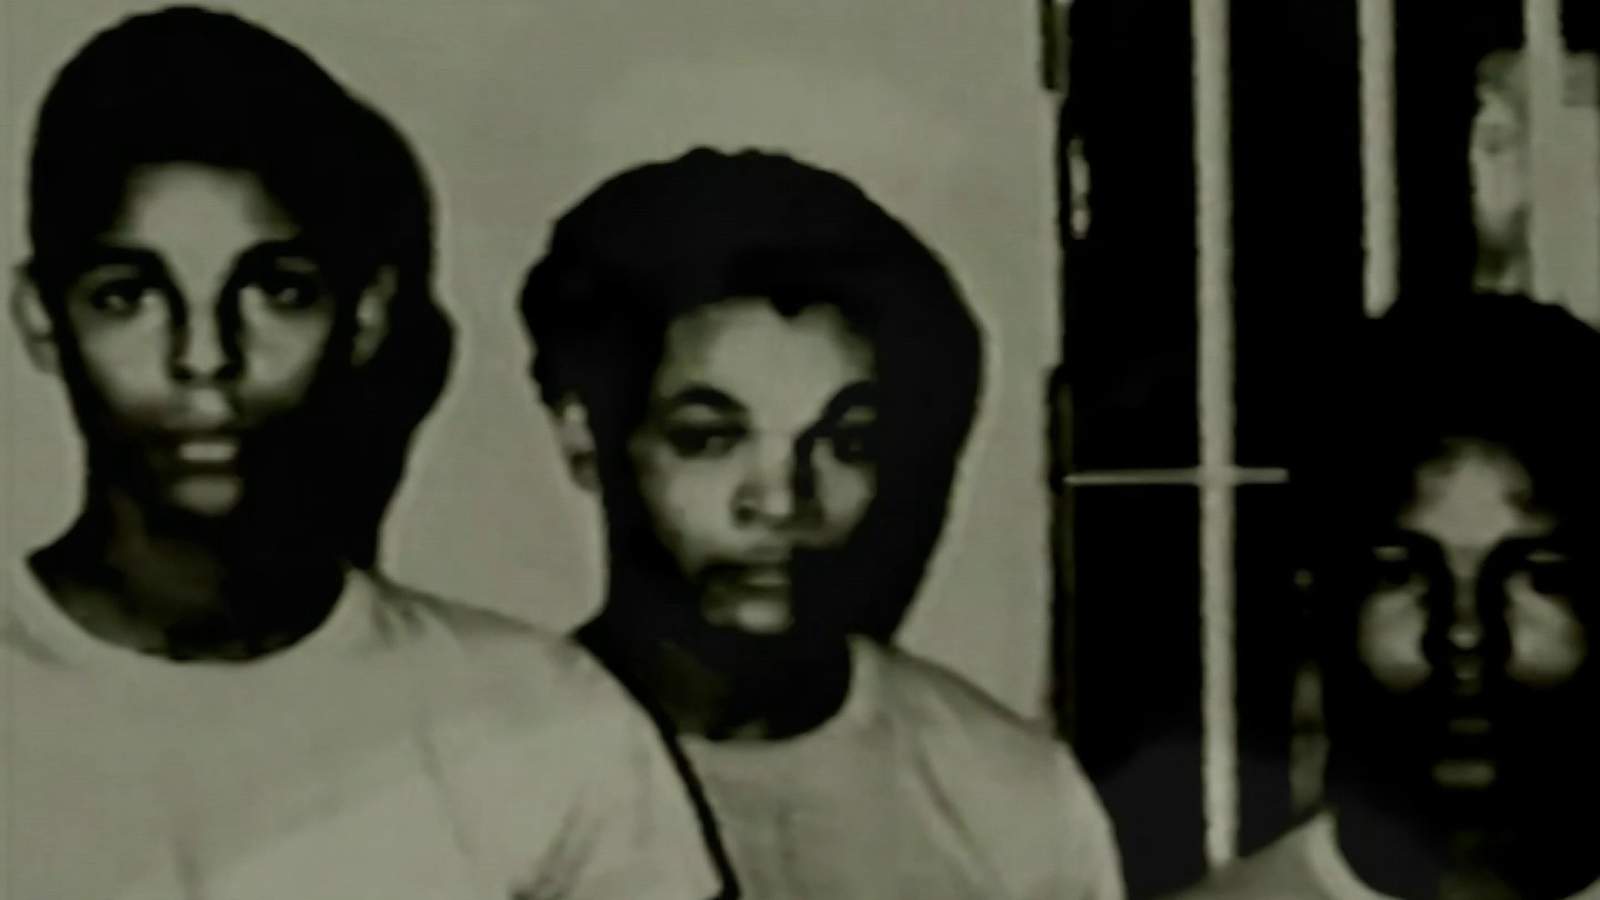 Florida lawmakers push to have Groveland Four exonerated